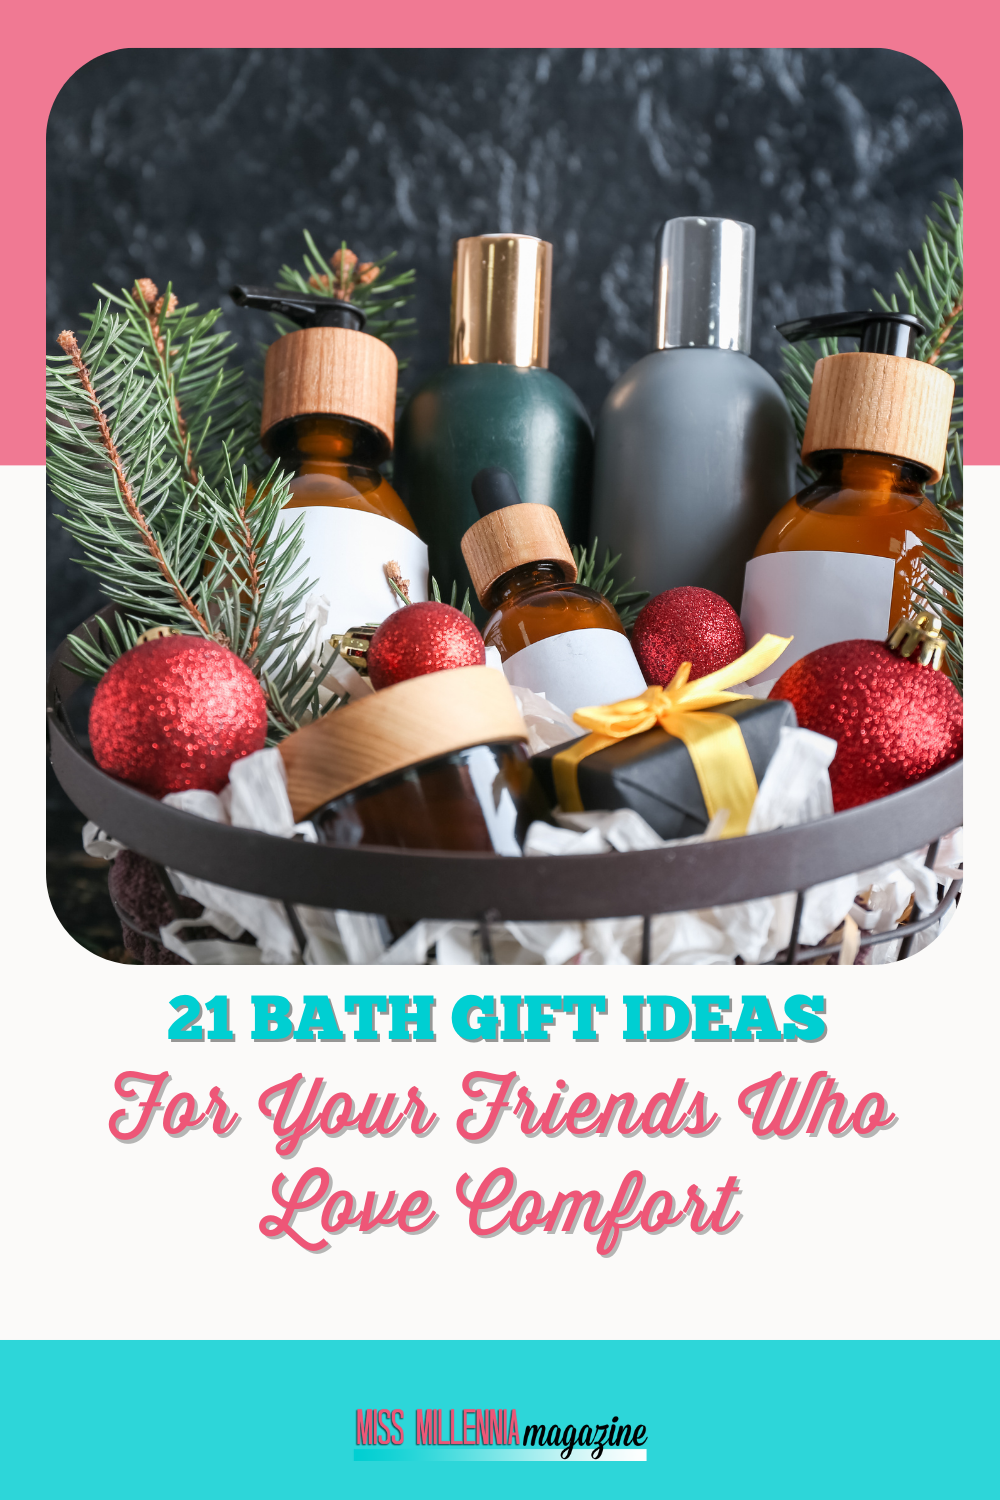 21 Bath Gift Ideas For Your Friends Who Love Comfort